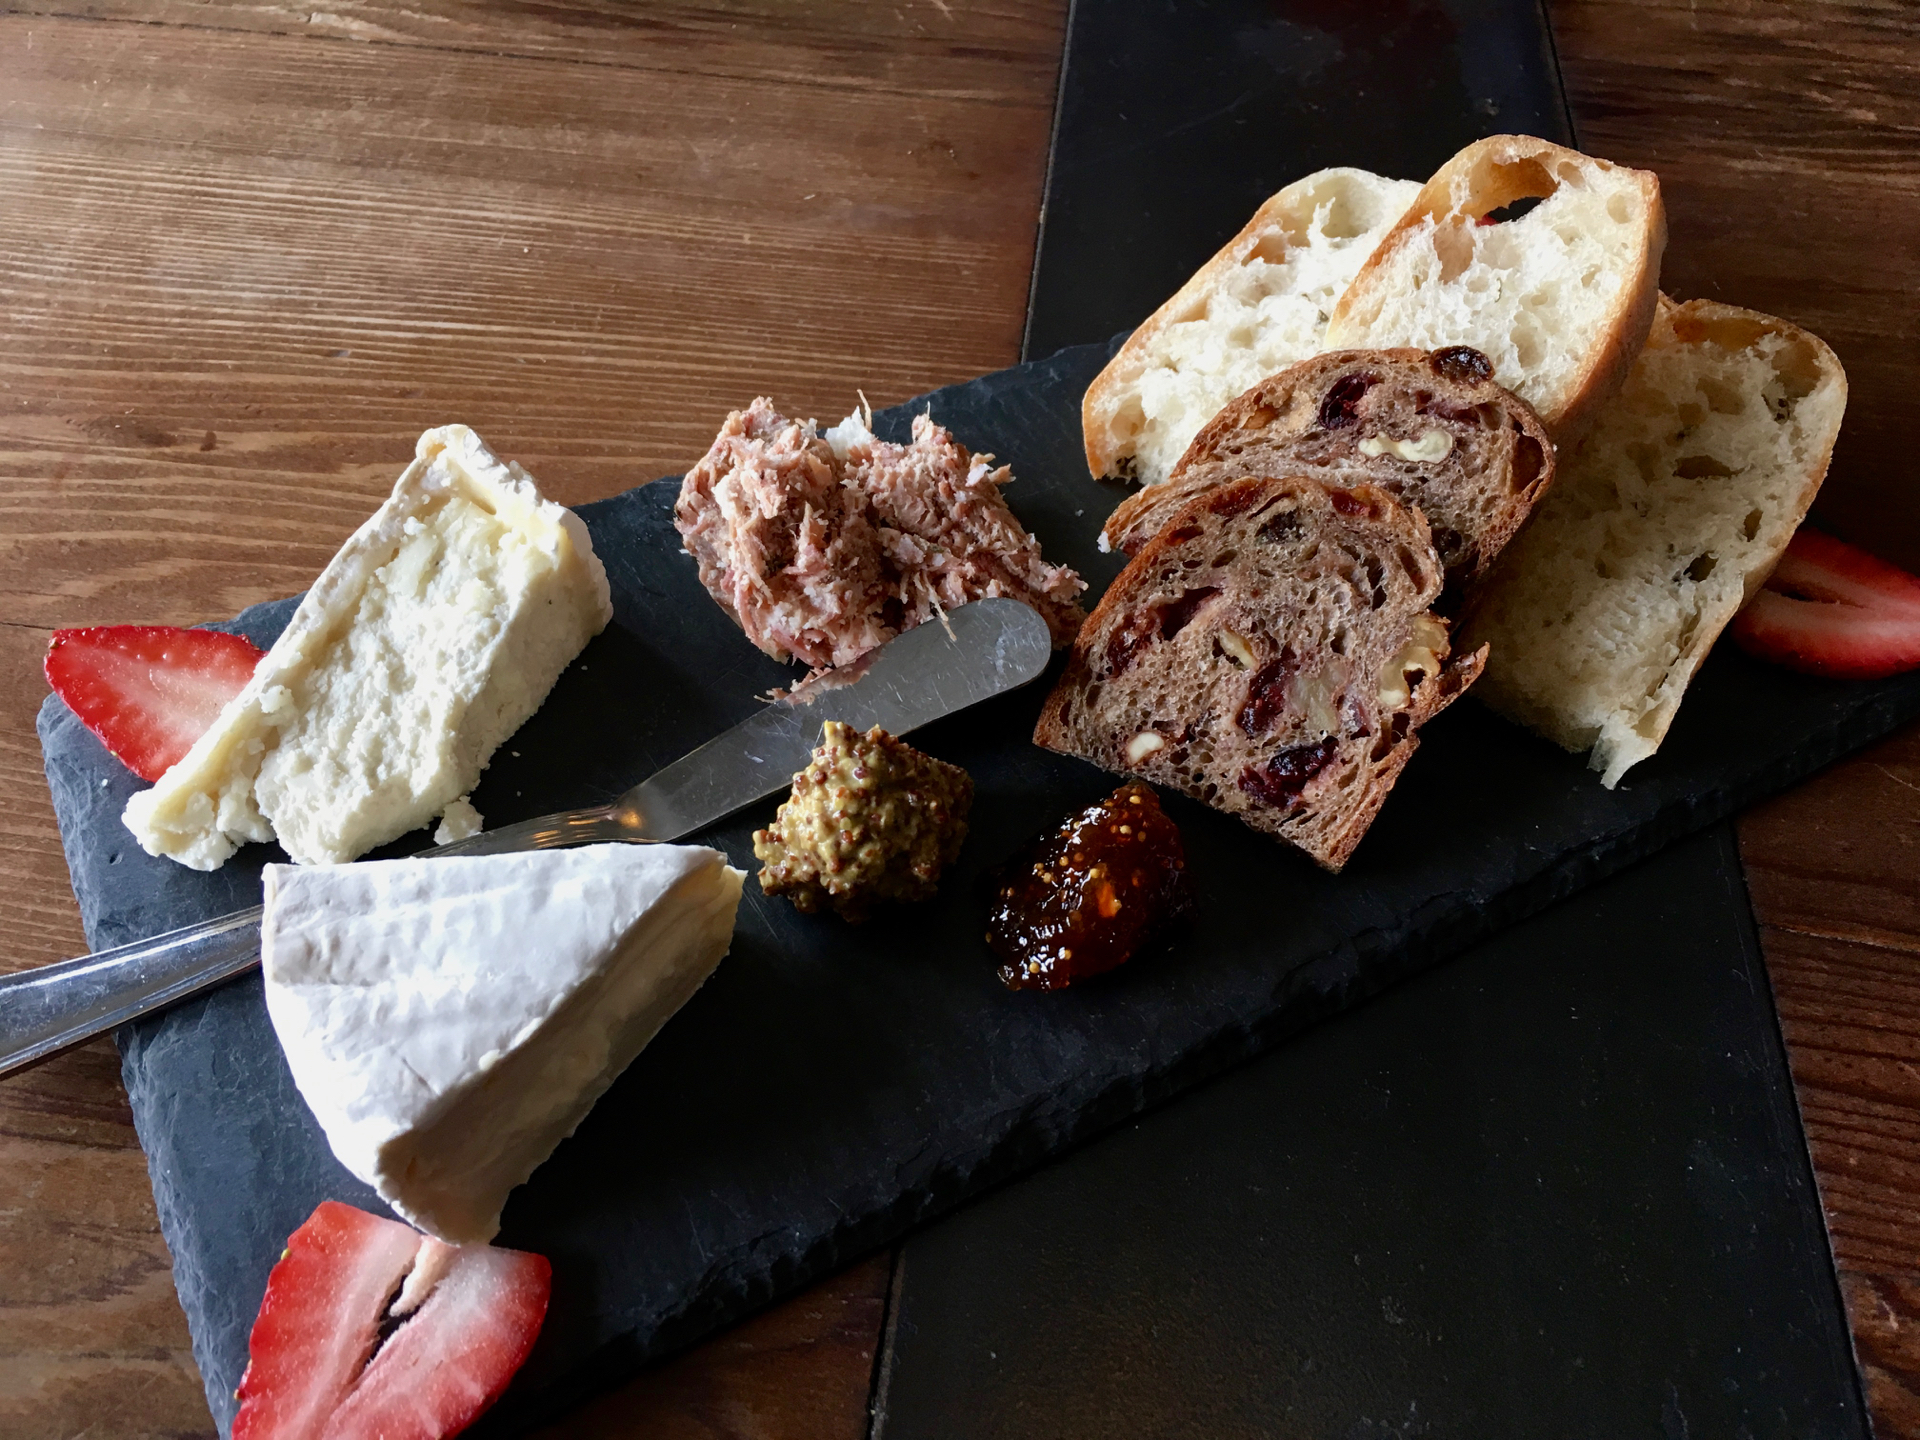 A cheeseboard at Rootstock Wine Bar with Marin French triple cream brie, Cypress Grove truffle tremor, pork rillette and Acme bread.